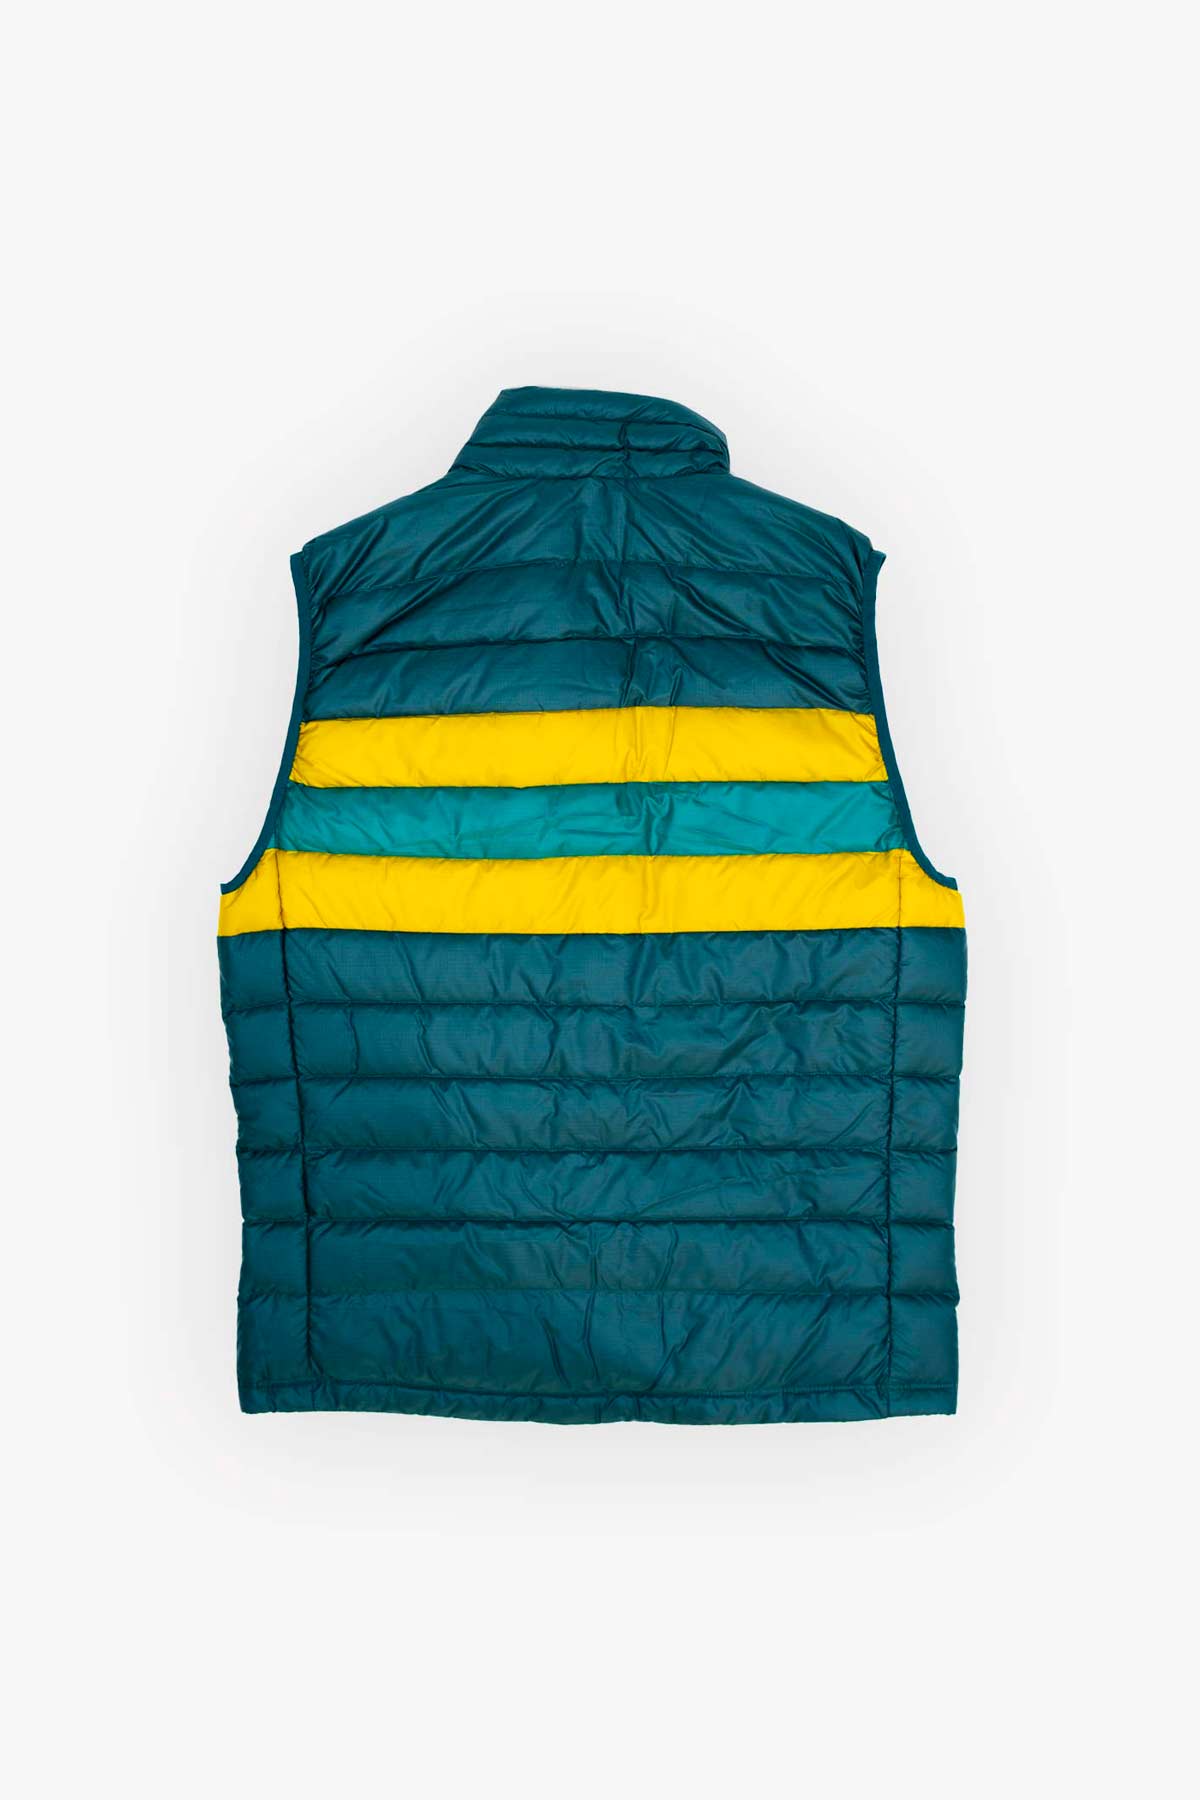 Down Sweater Vest - Patagonia